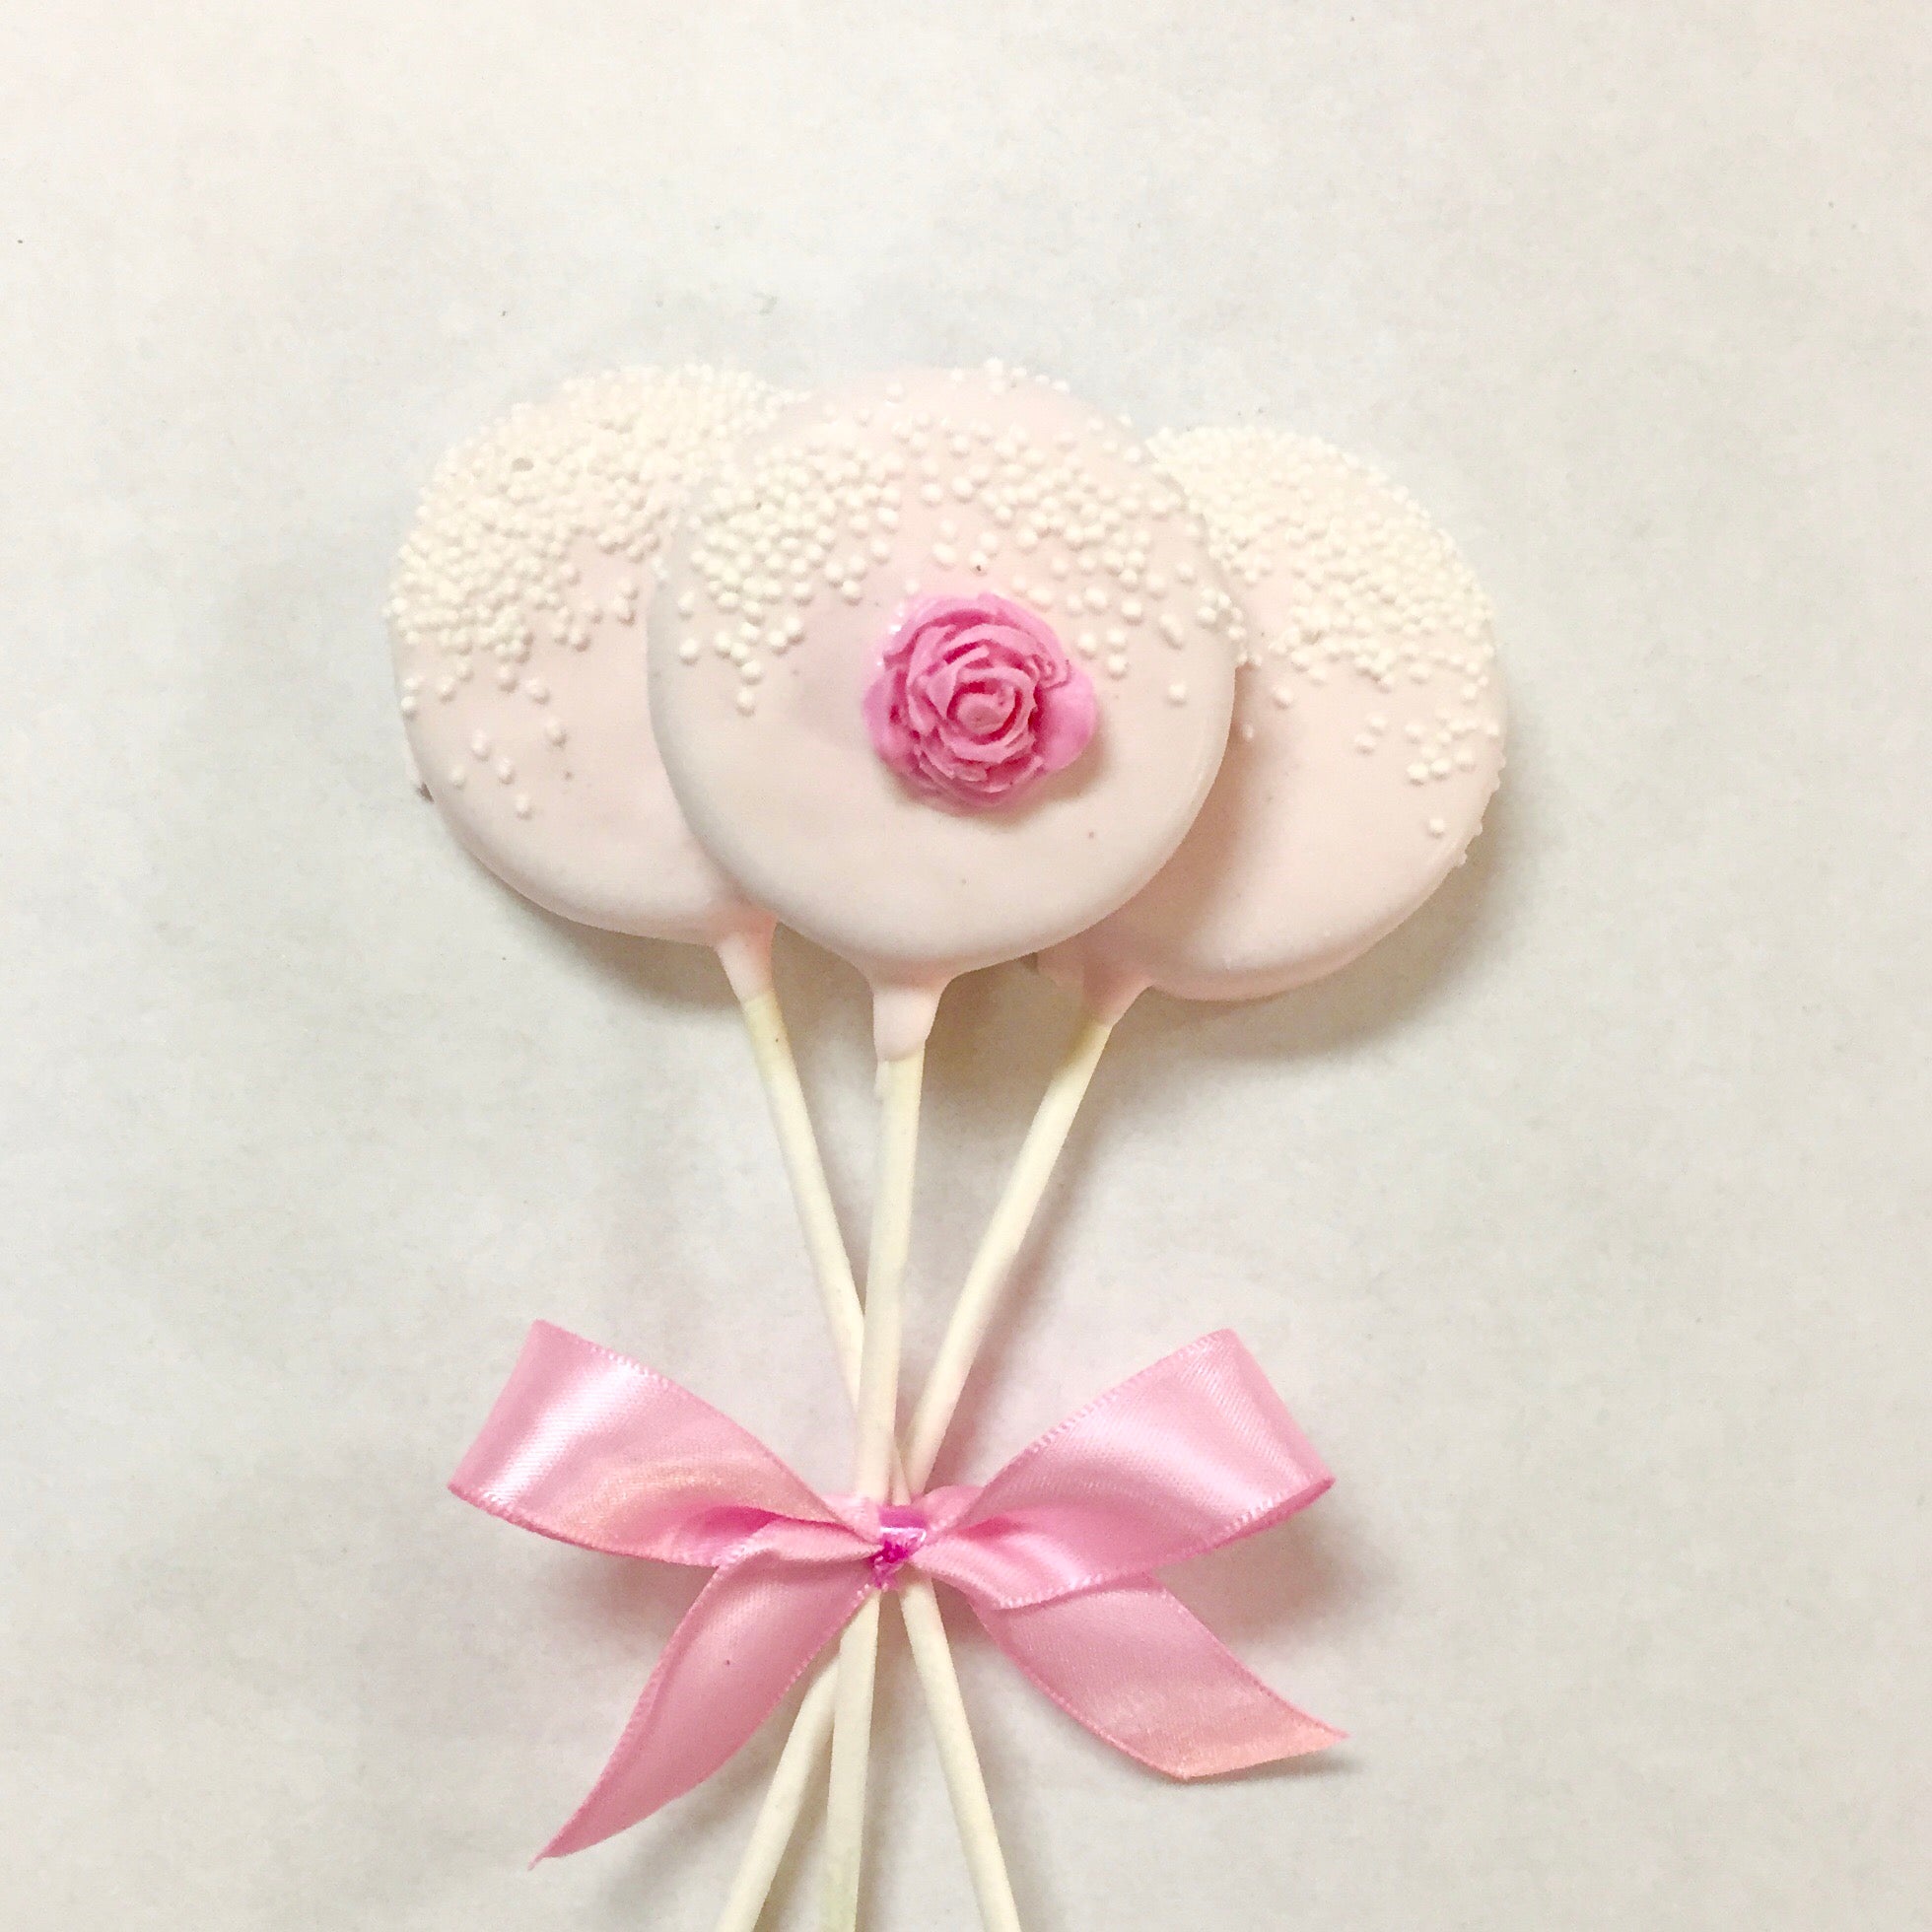 Light Pink Chocolate covered Oreos with nonpareils and a pink chocolate rose